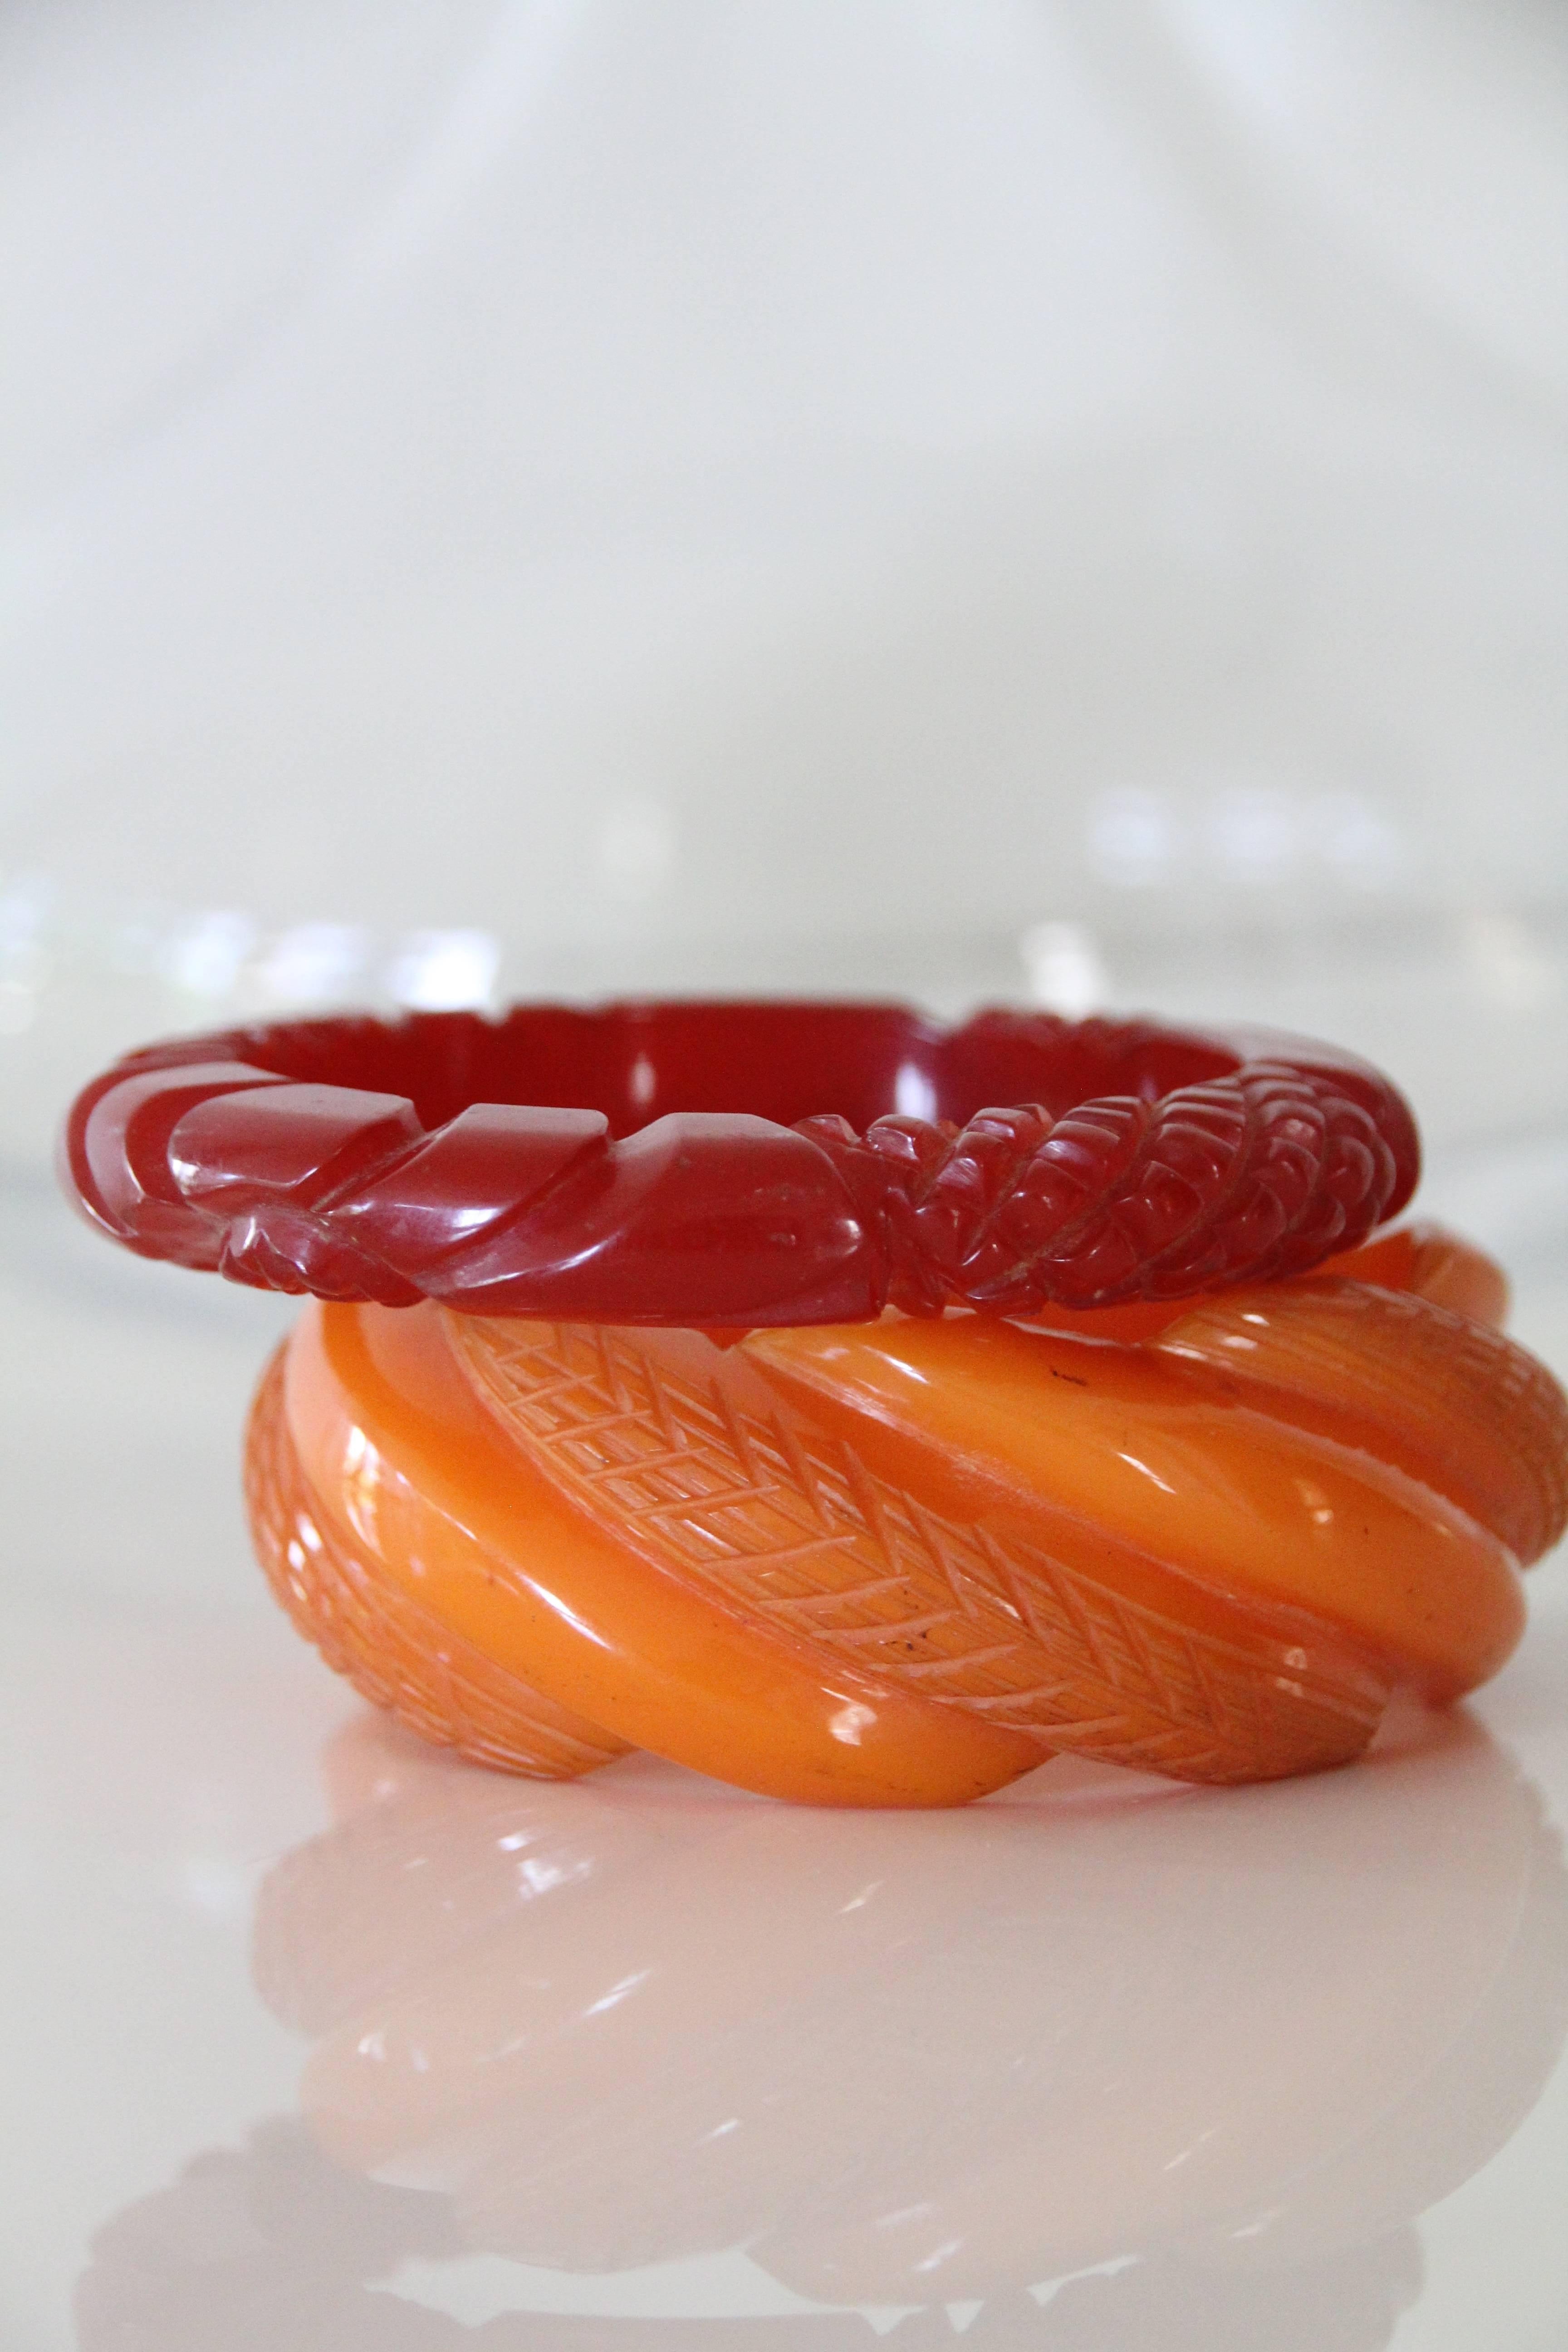 A beautiful and complimentary lot of 2,1940s, heavily carved, butterscotch and cinnabar colored, Bakelite bangles. We love that delightful and distinctive look of stacked Bakelite bangles!! 